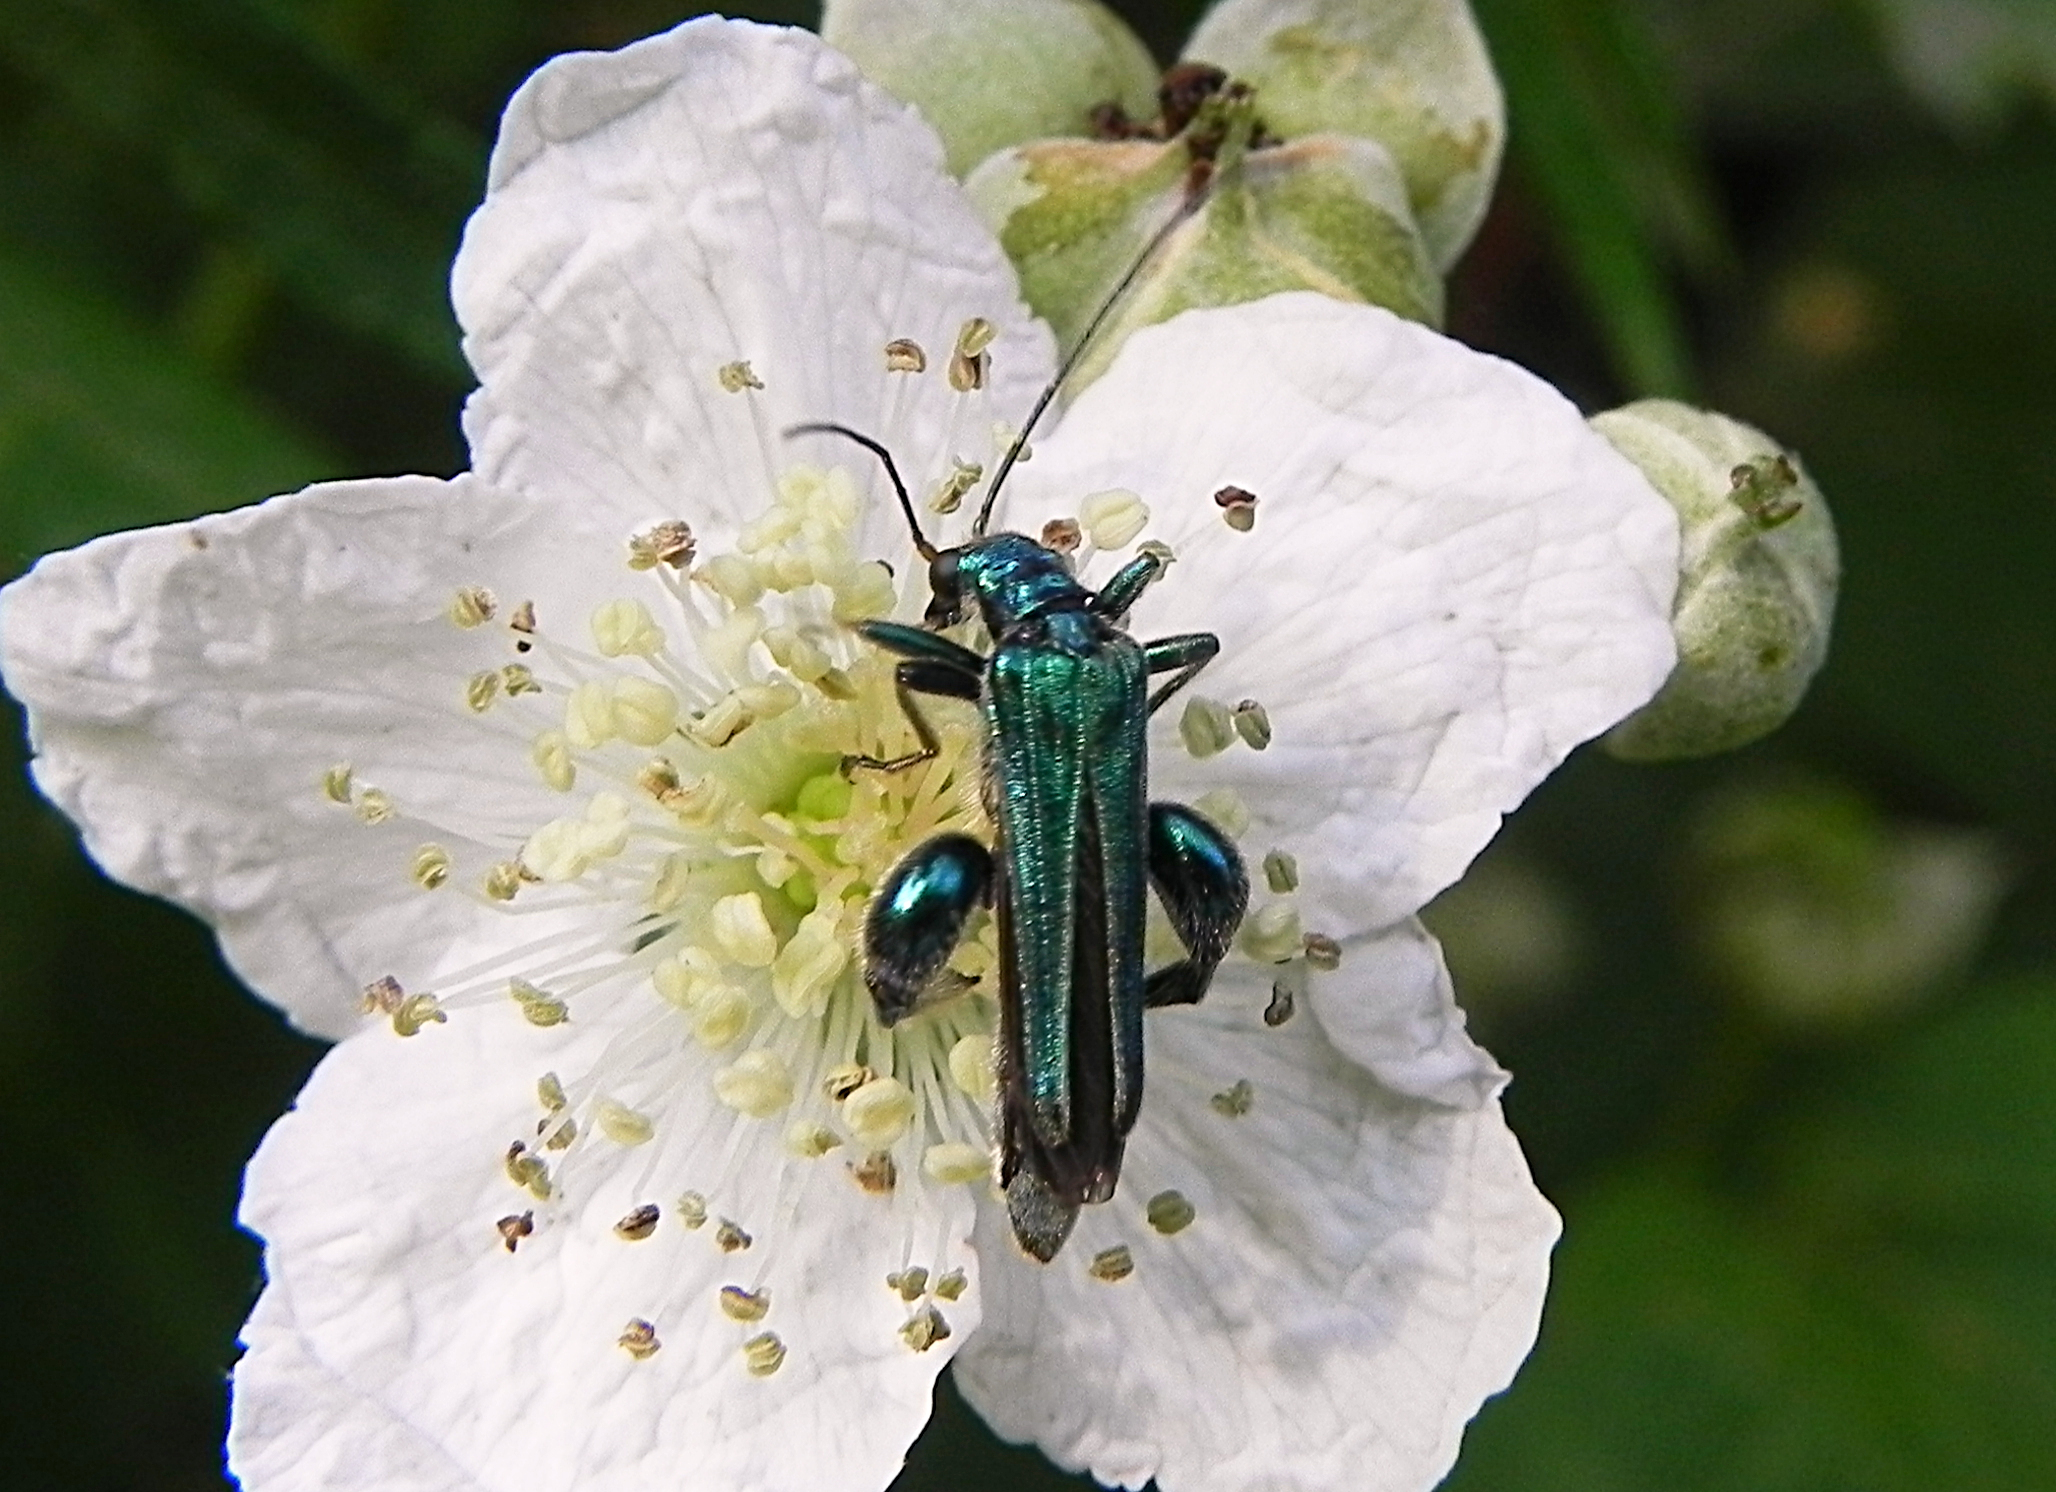 fam. Oedemeridae,. Italia, Brescia, 1 Jun 2014. Provided by Paolo to children for didactics, but not shot with them.